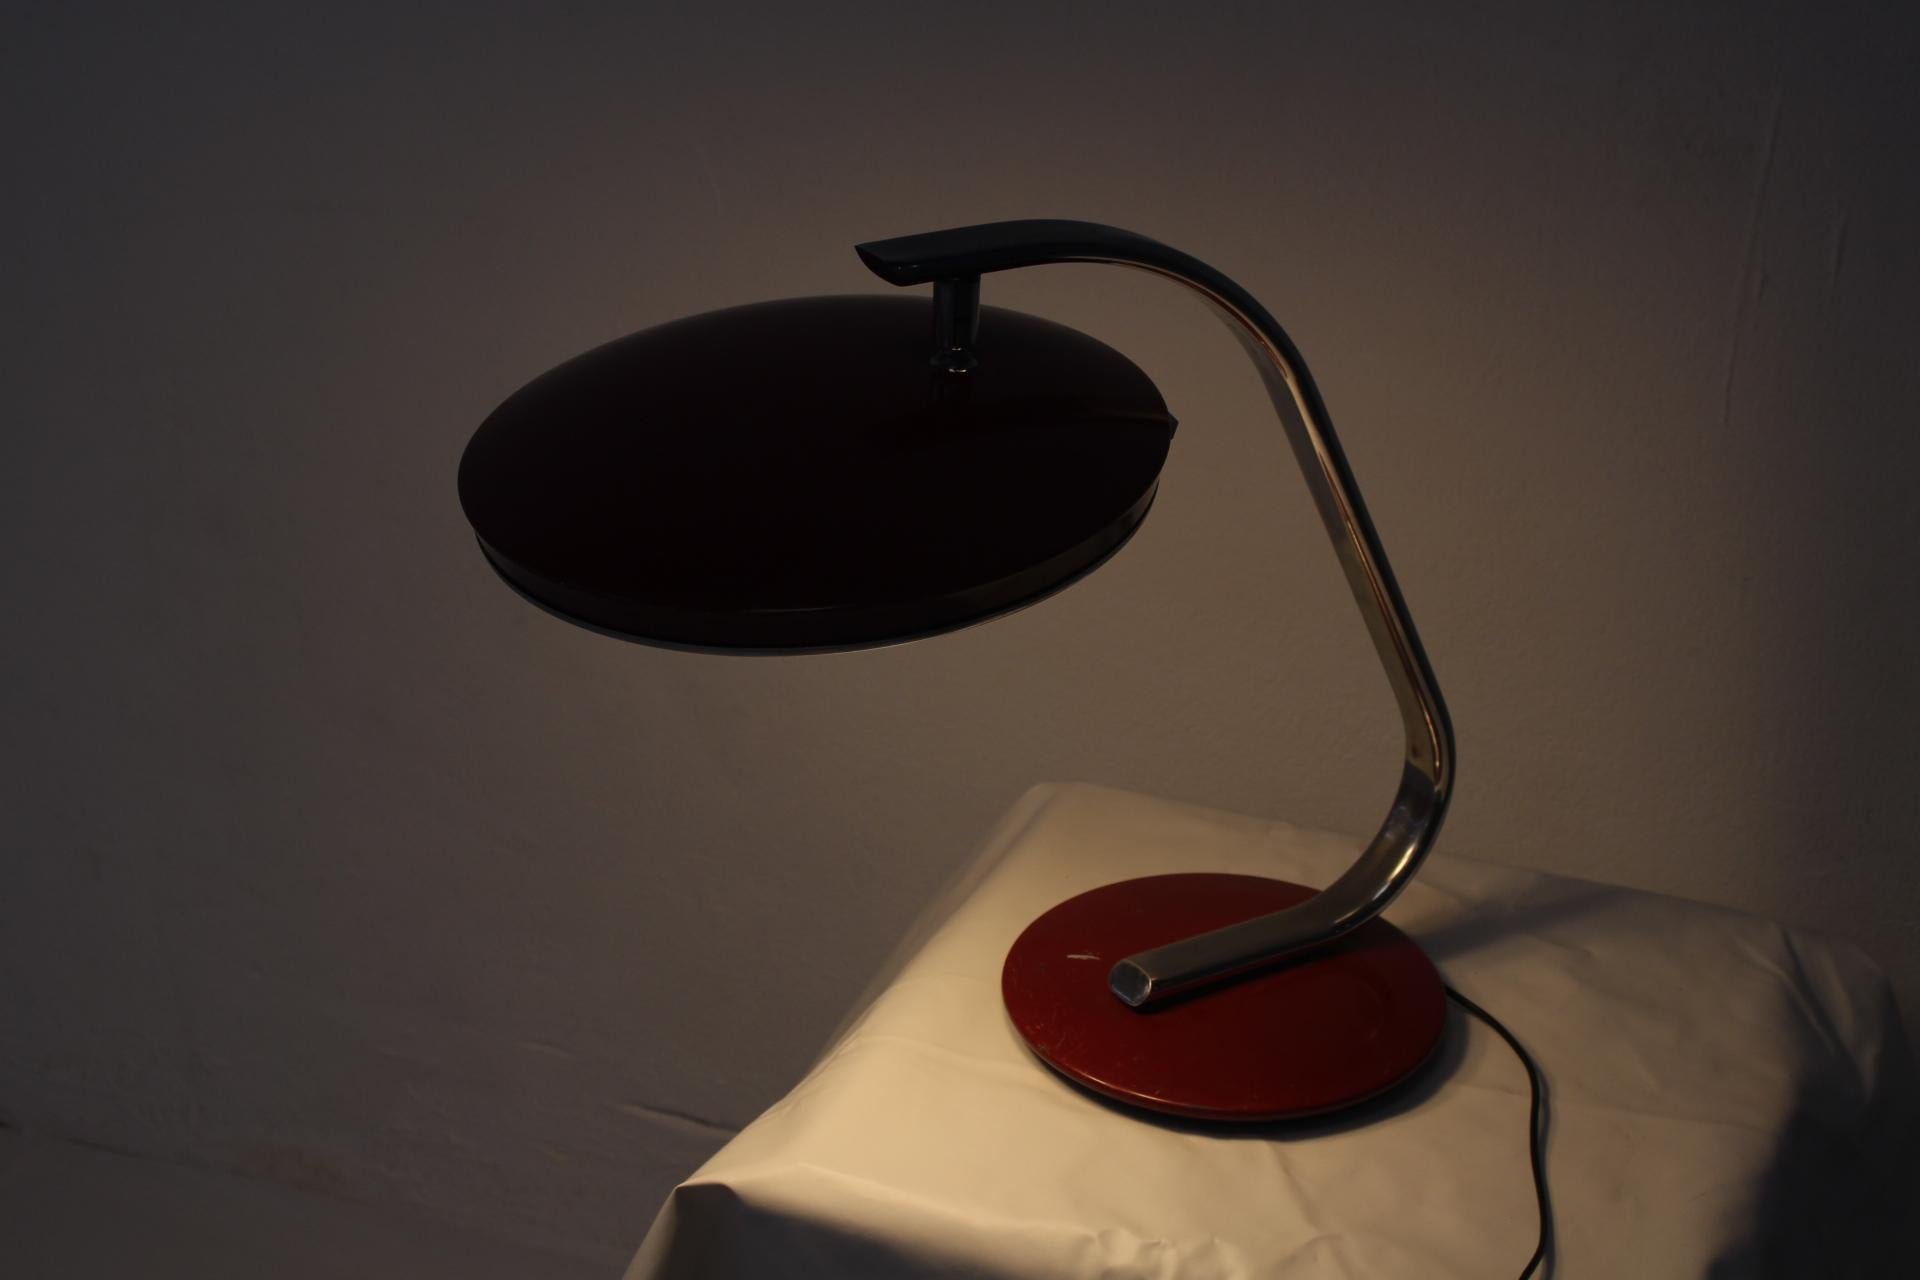 Late 20th Century Midcentury Fase 520-C Bauhaus Design Red Articulated Desk Lamp For Sale